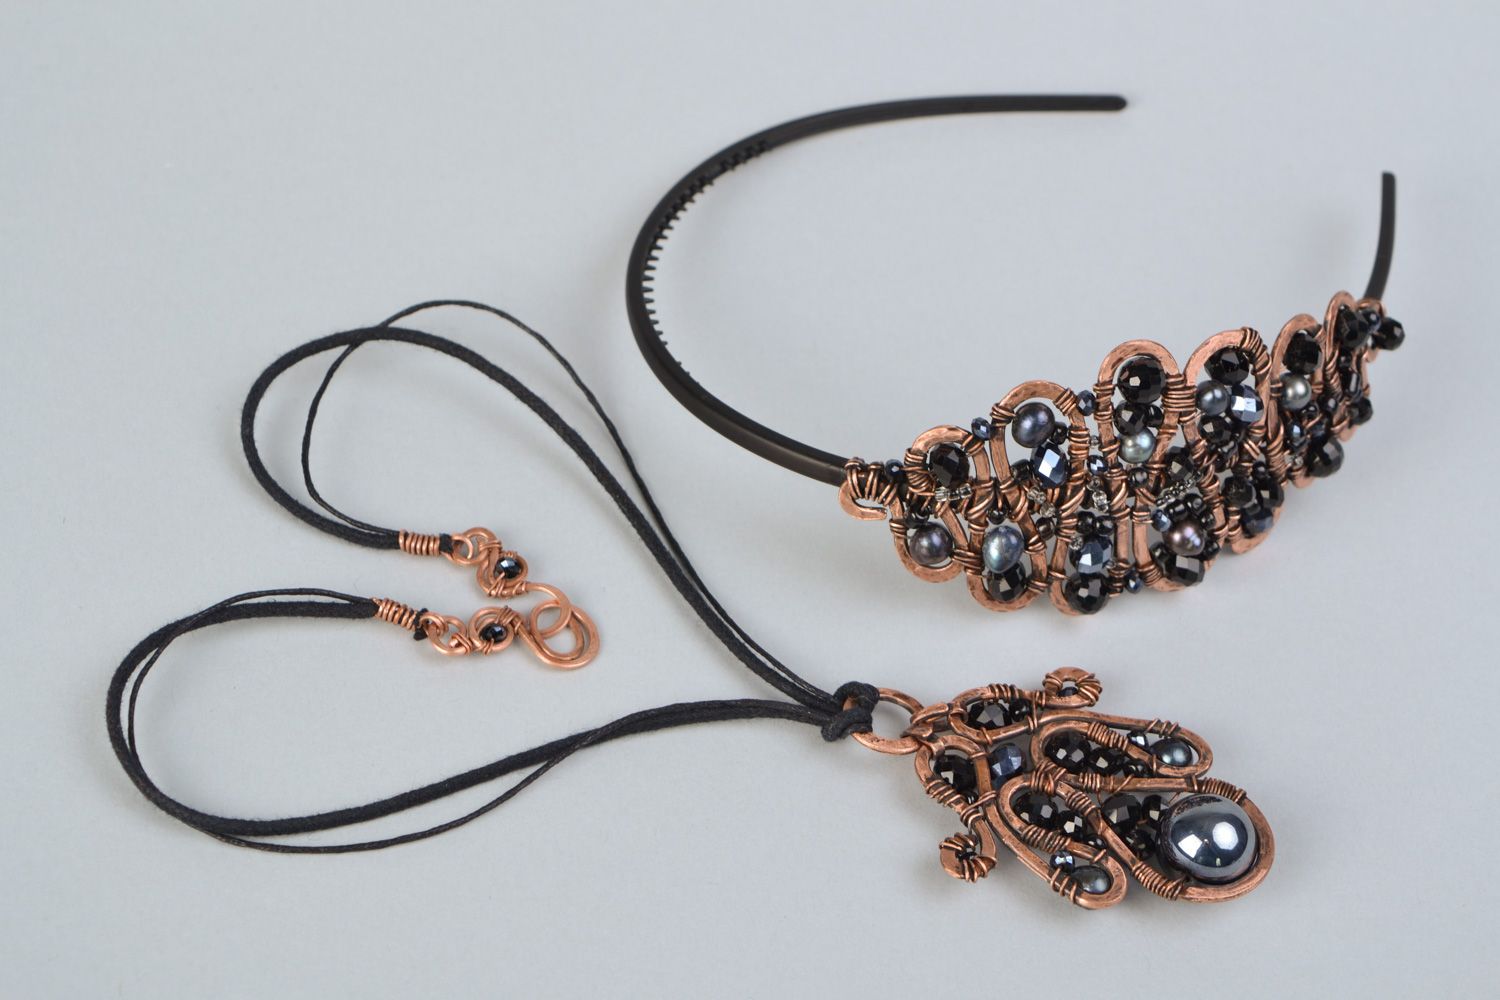 Handmade jewelry set wire wrap copper pendant and headband with fresh-water pearls photo 1